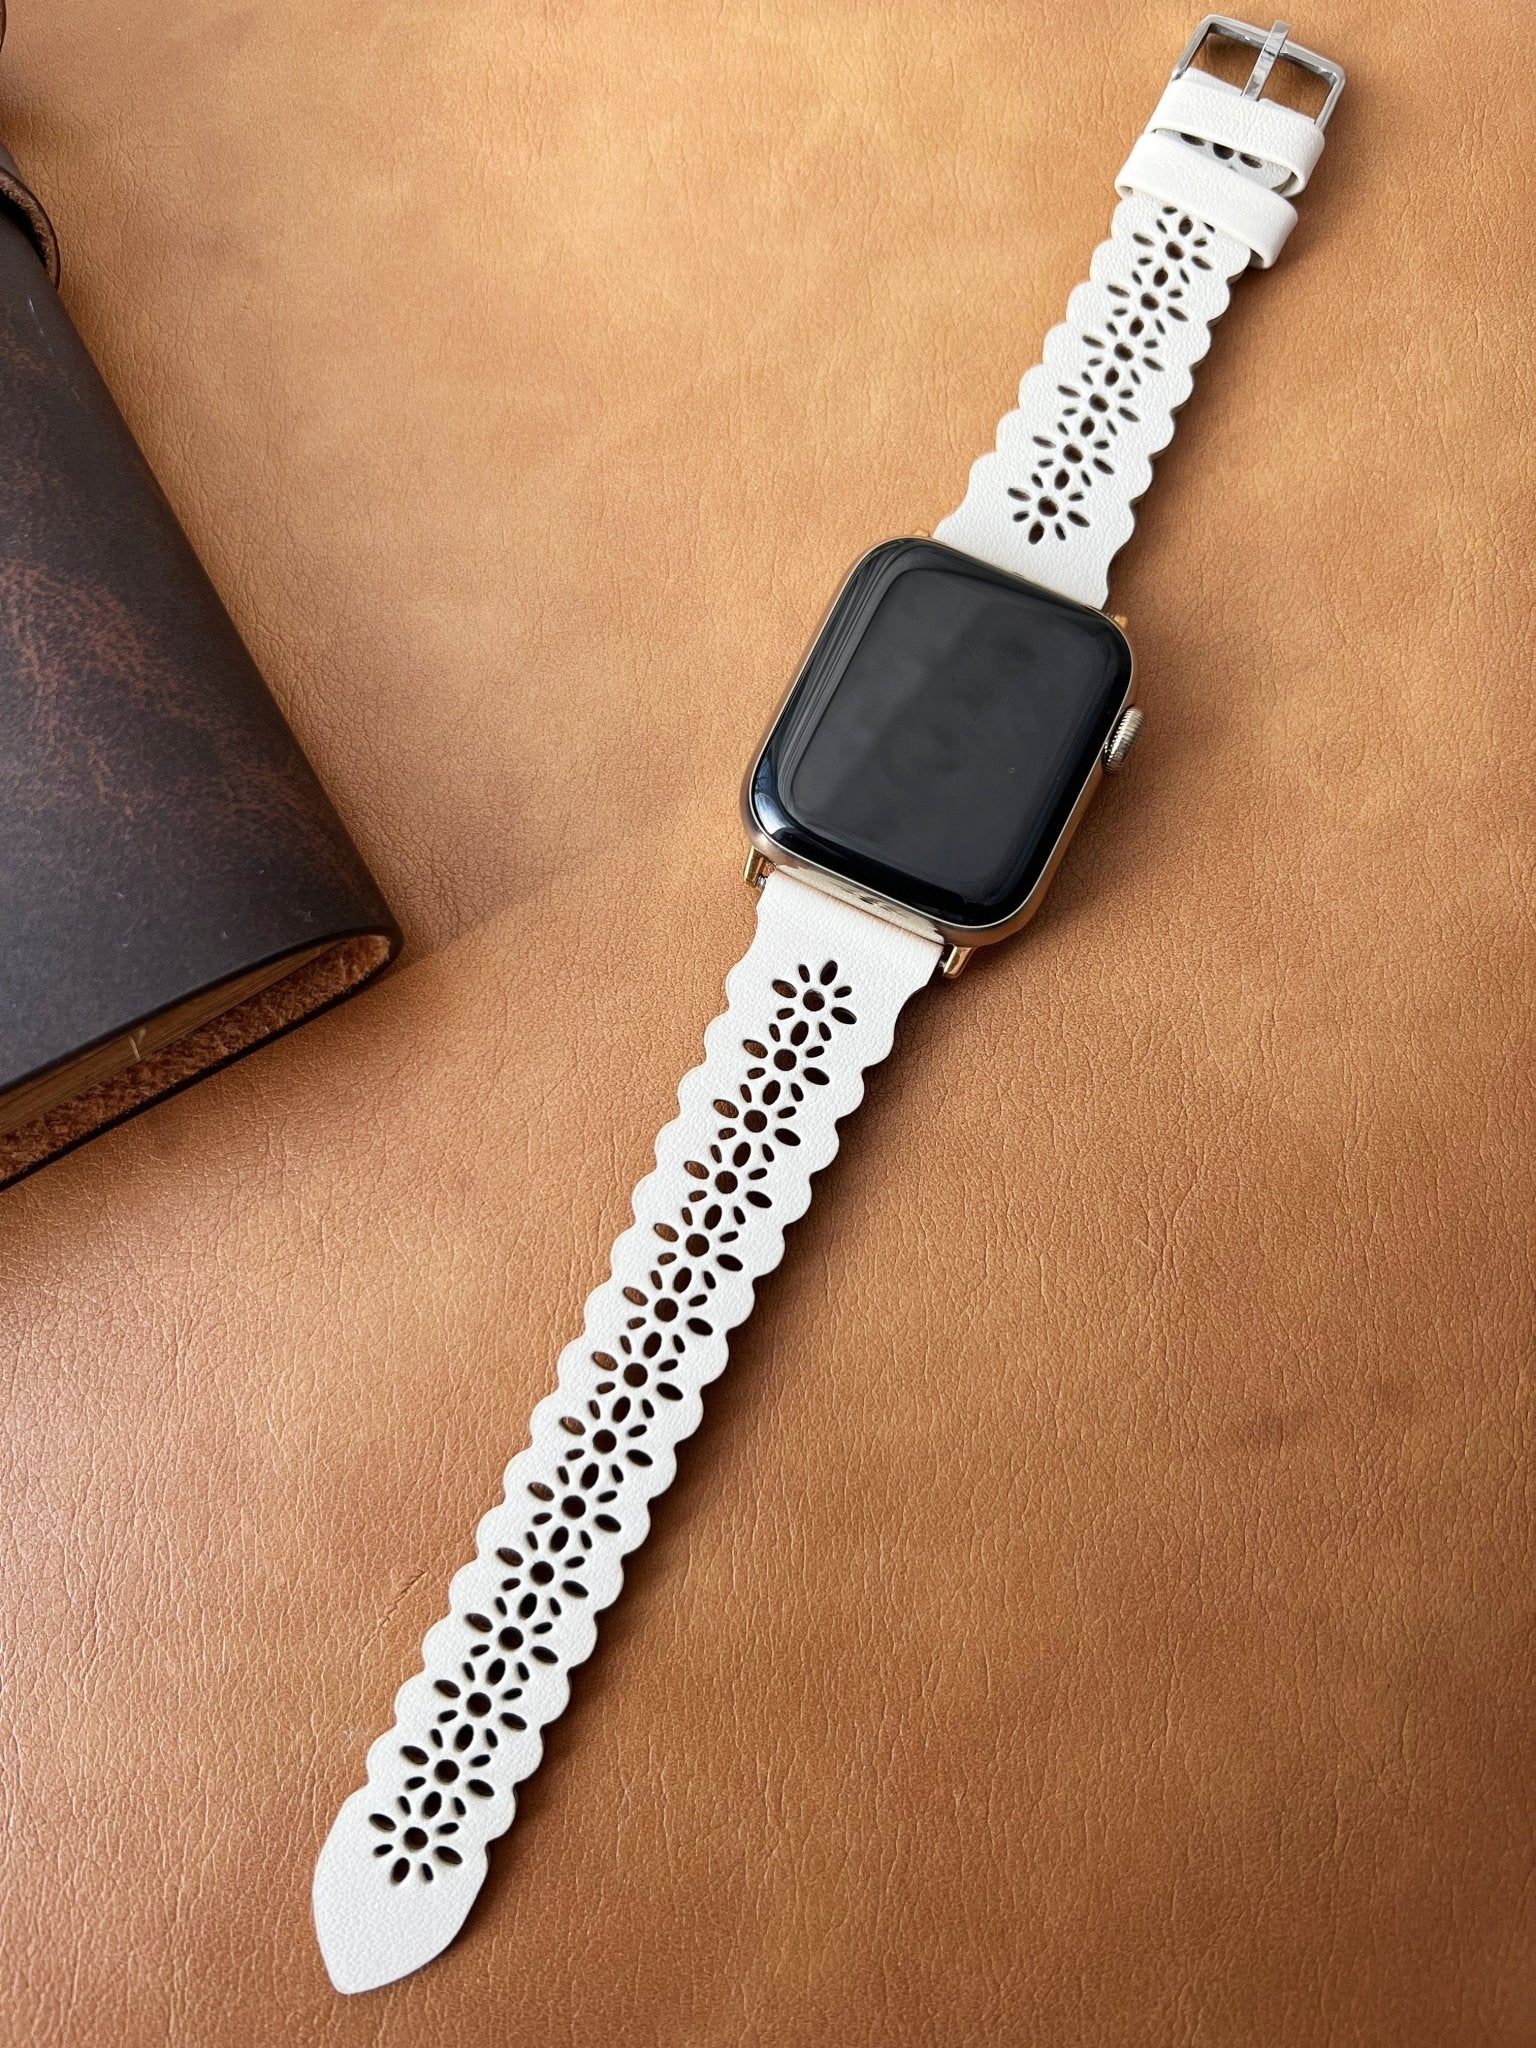 Off White Filigree Laser Cut Lace Leather Watch Band - Mareevo